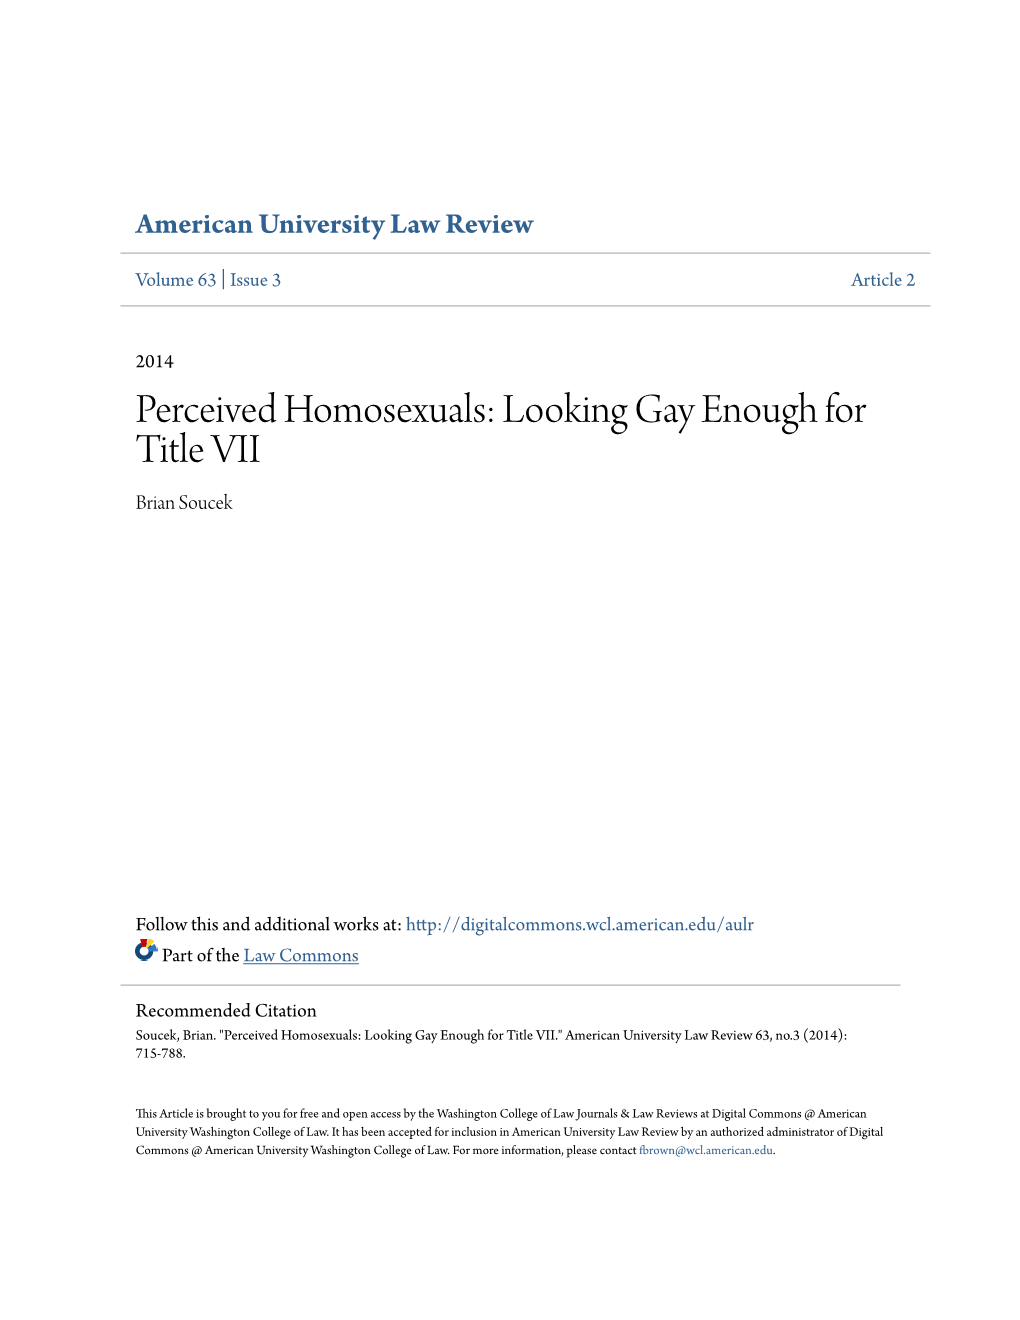 Perceived Homosexuals: Looking Gay Enough for Title VII Brian Soucek